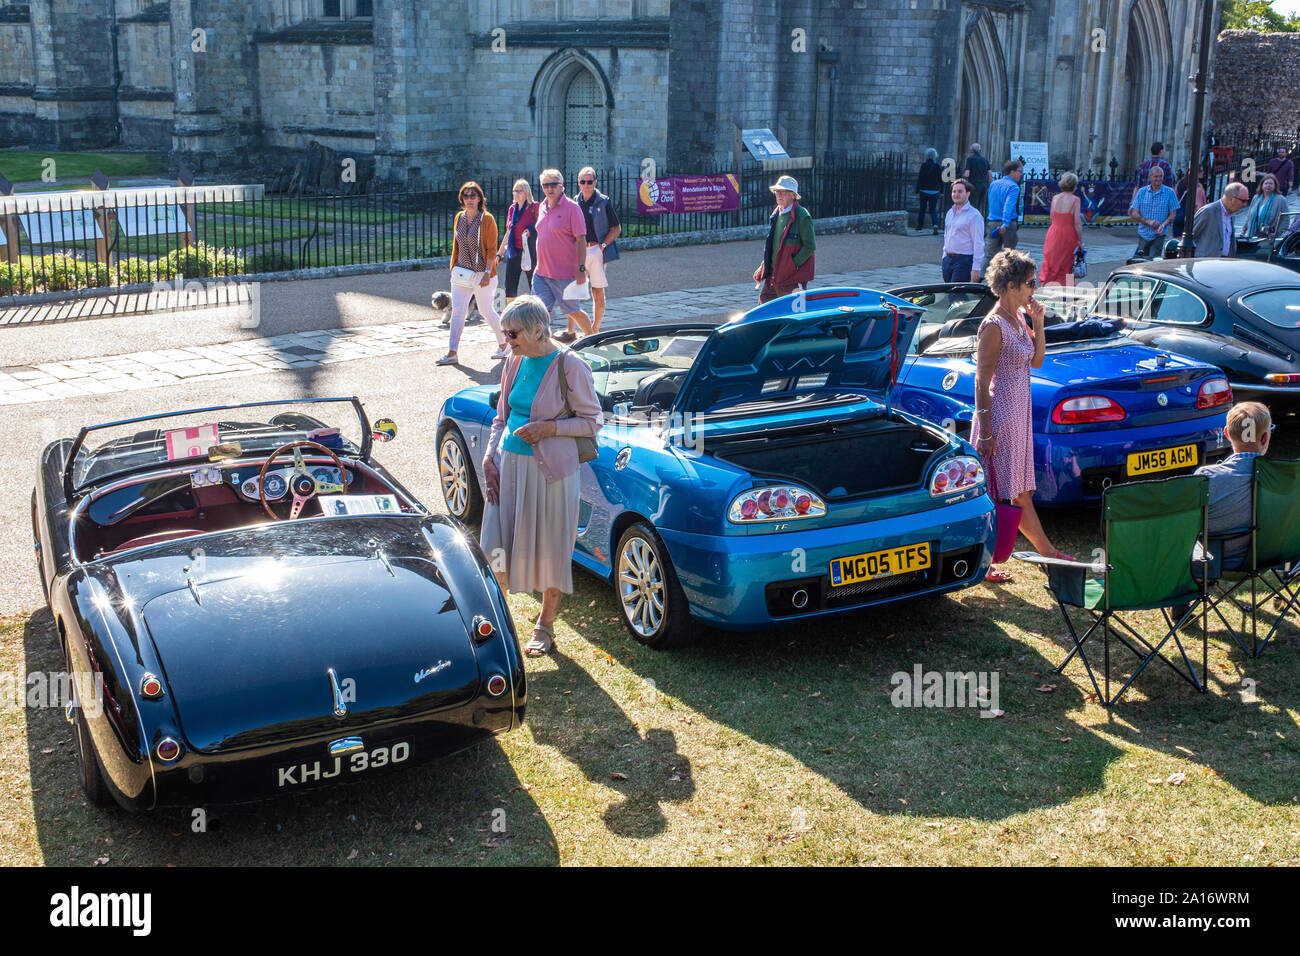 People looking at classic cars on display outside Winchester Cathedral, Winchester, UK Stock Photo